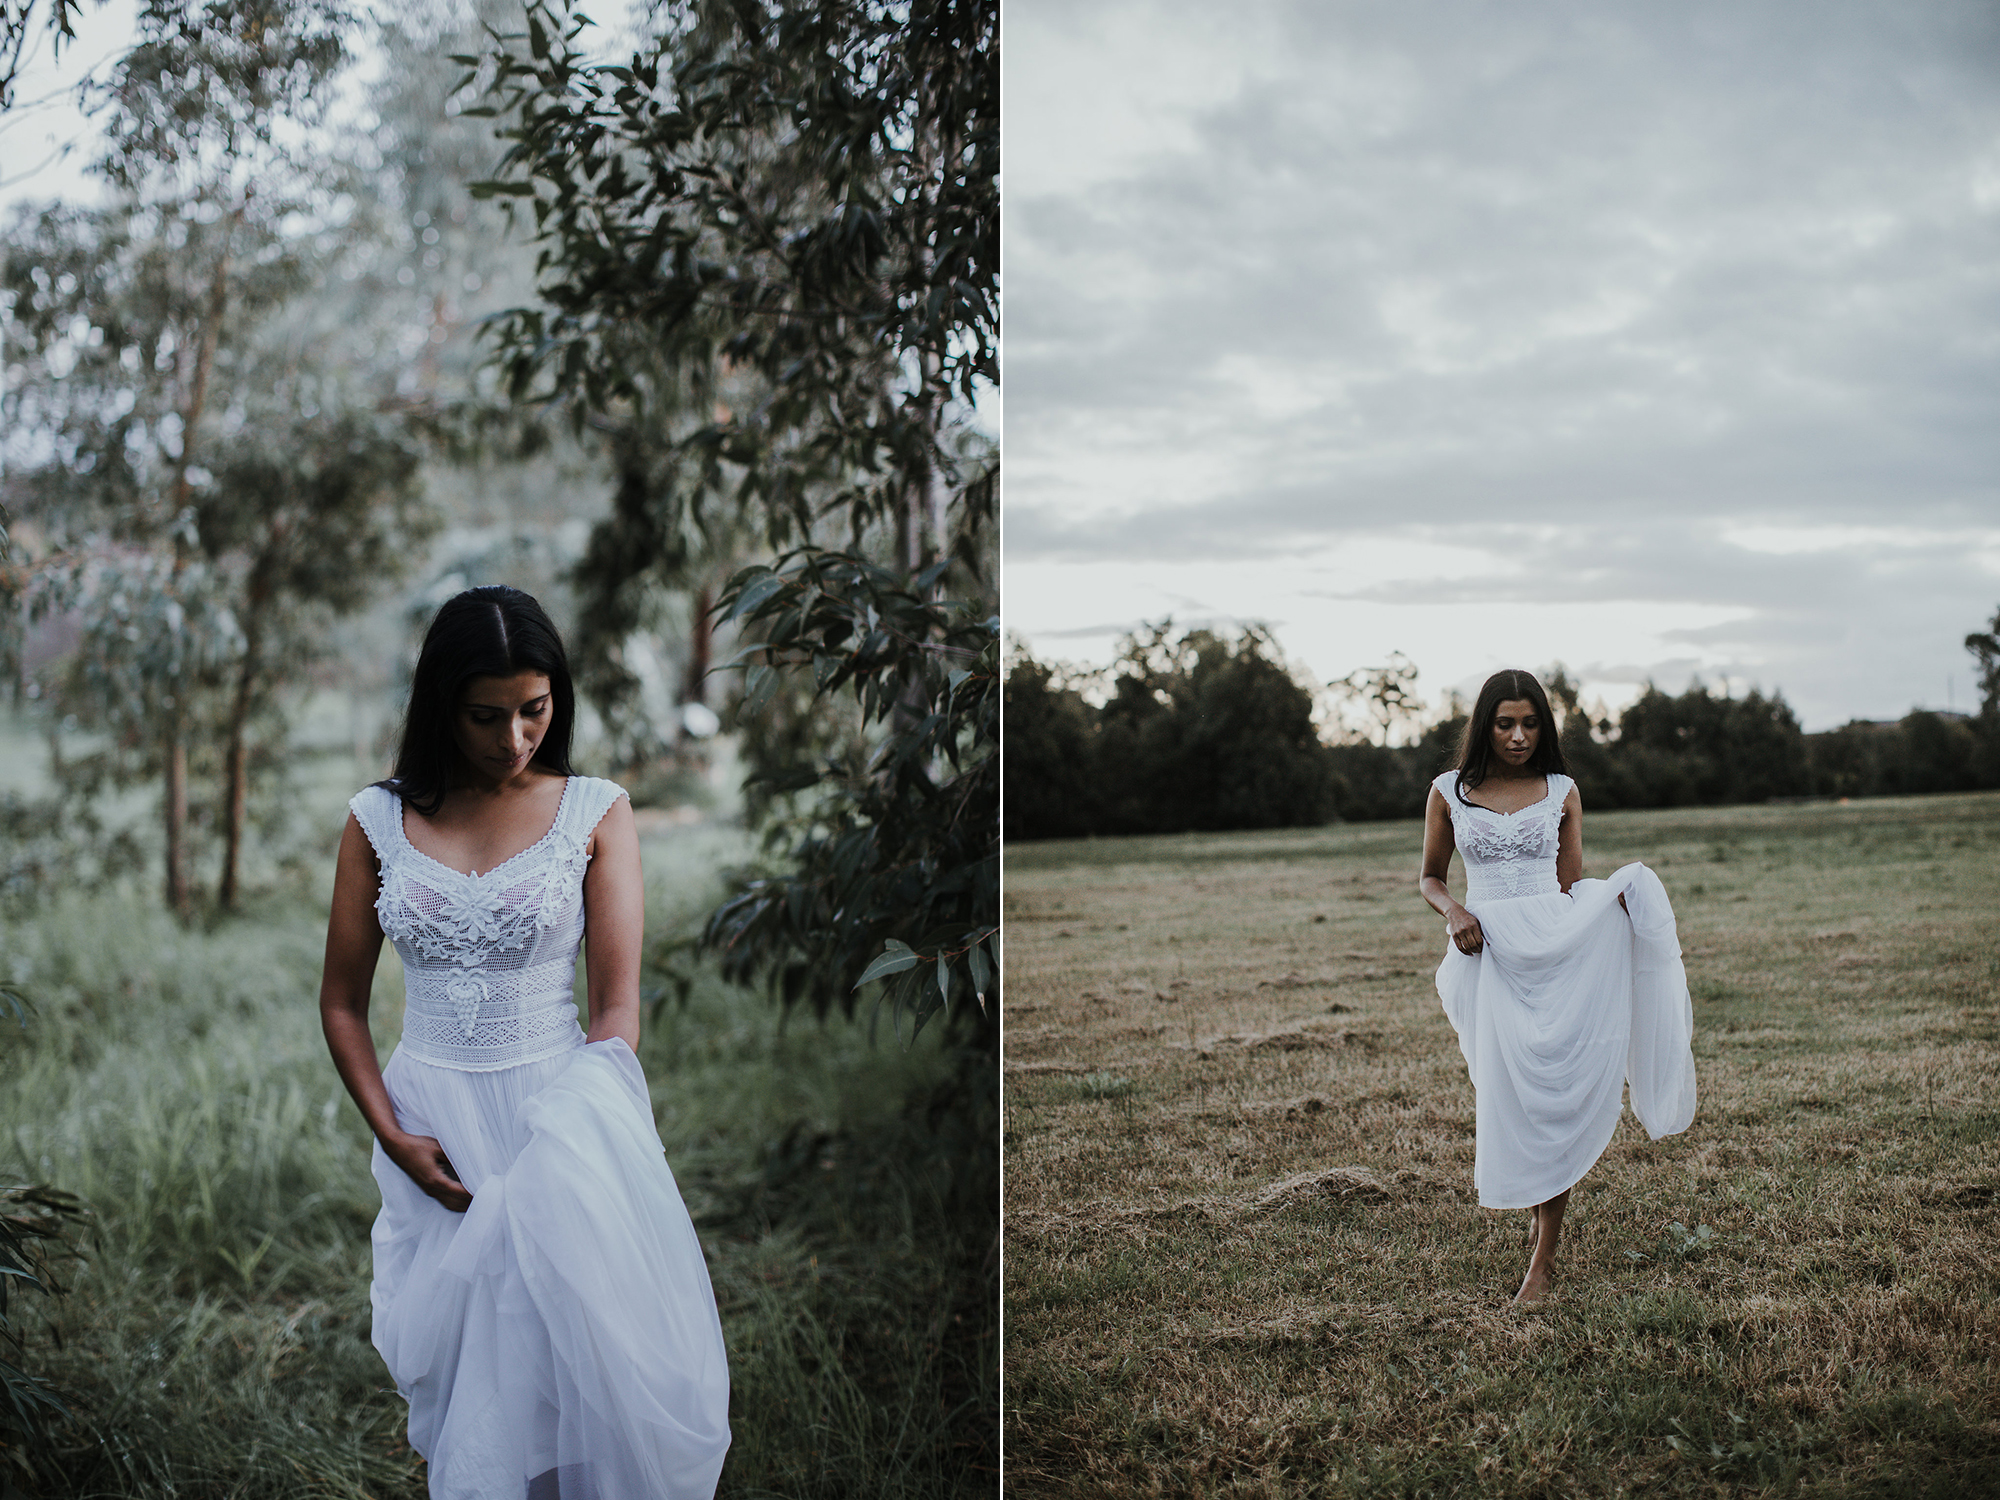 Hellenic vintage inspirational shoot in the woods with Atelier Zolotas wedding dress